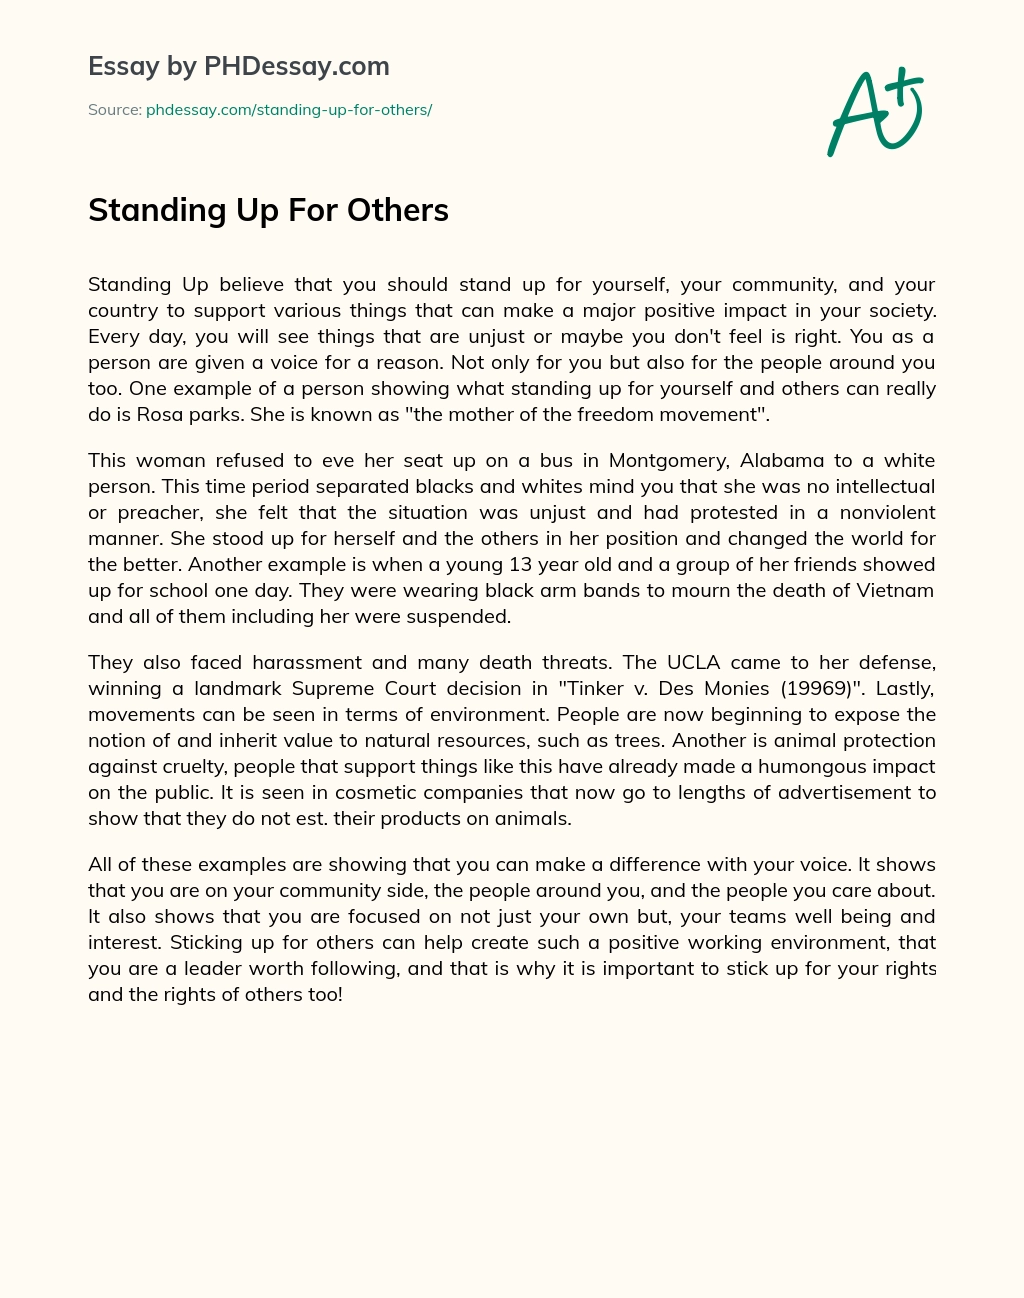 Standing Up For Others essay